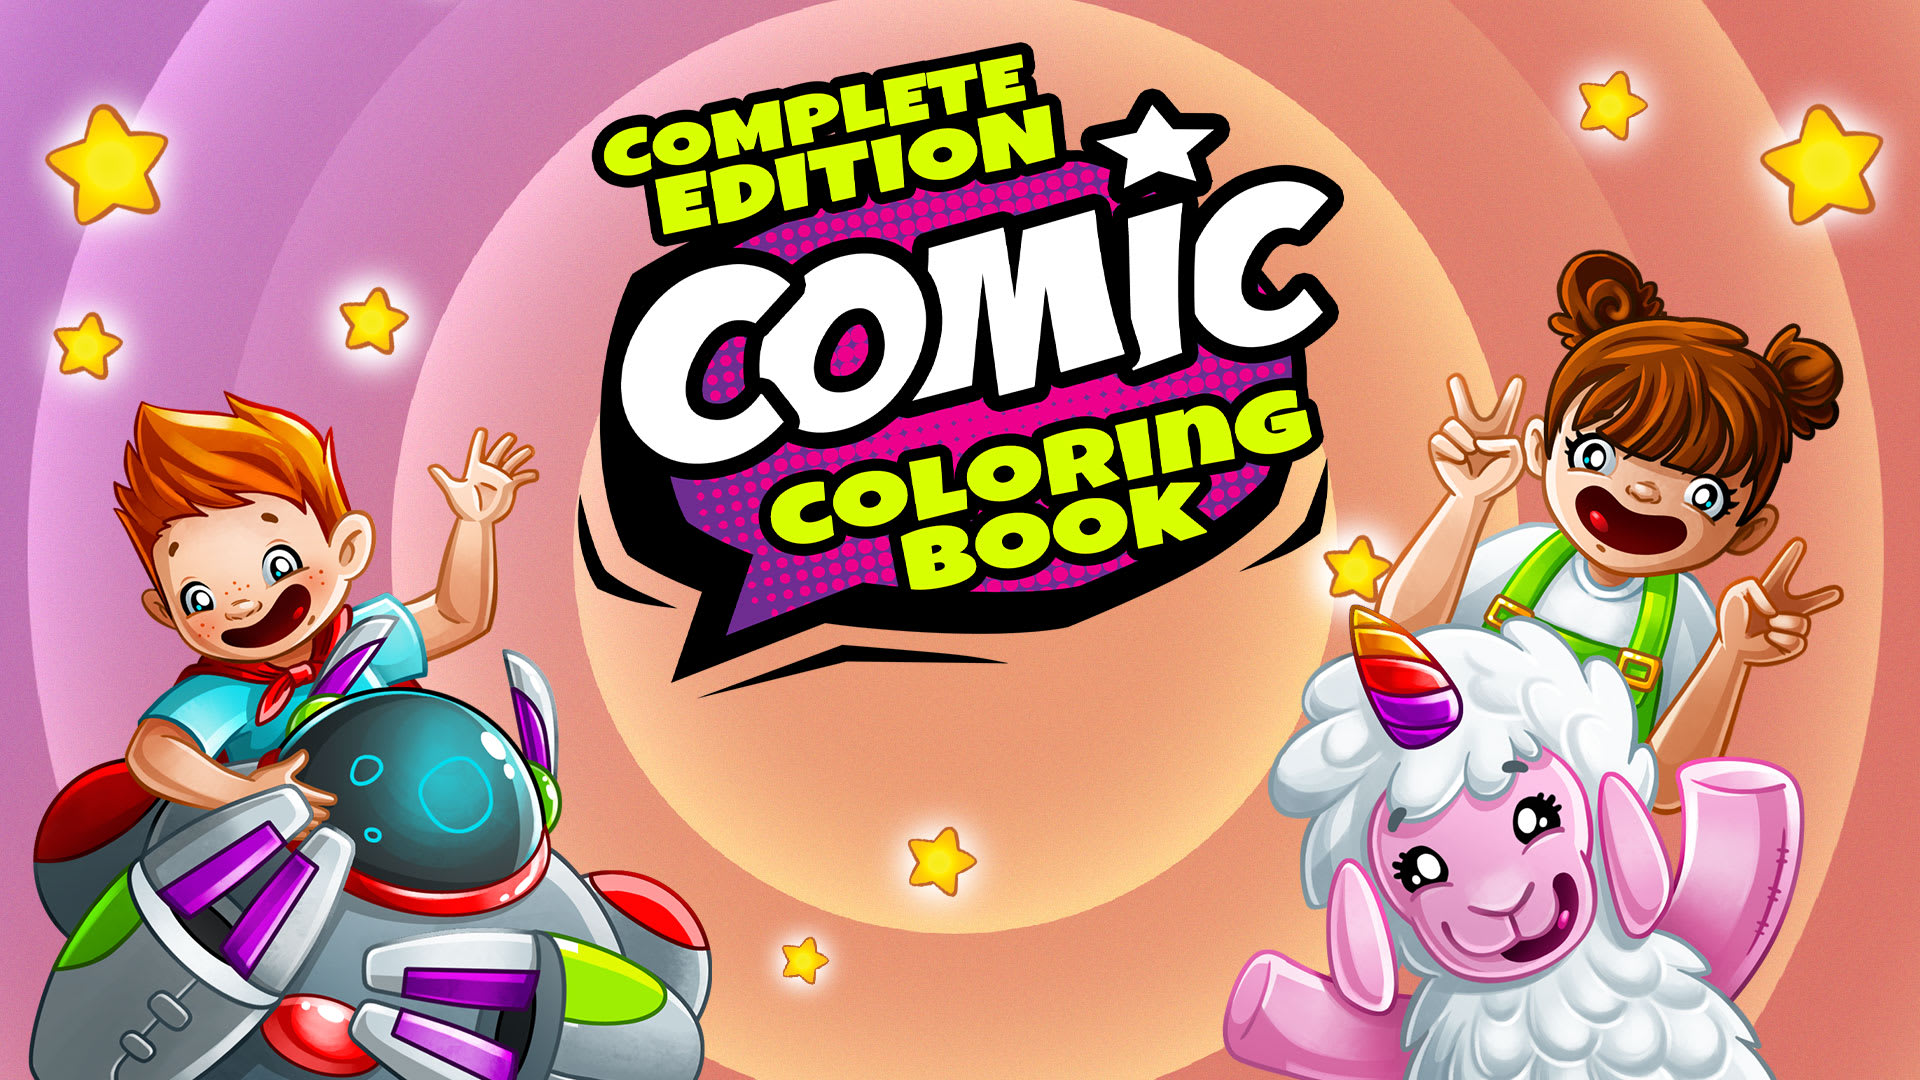 Comic Coloring Book - Complete Edition